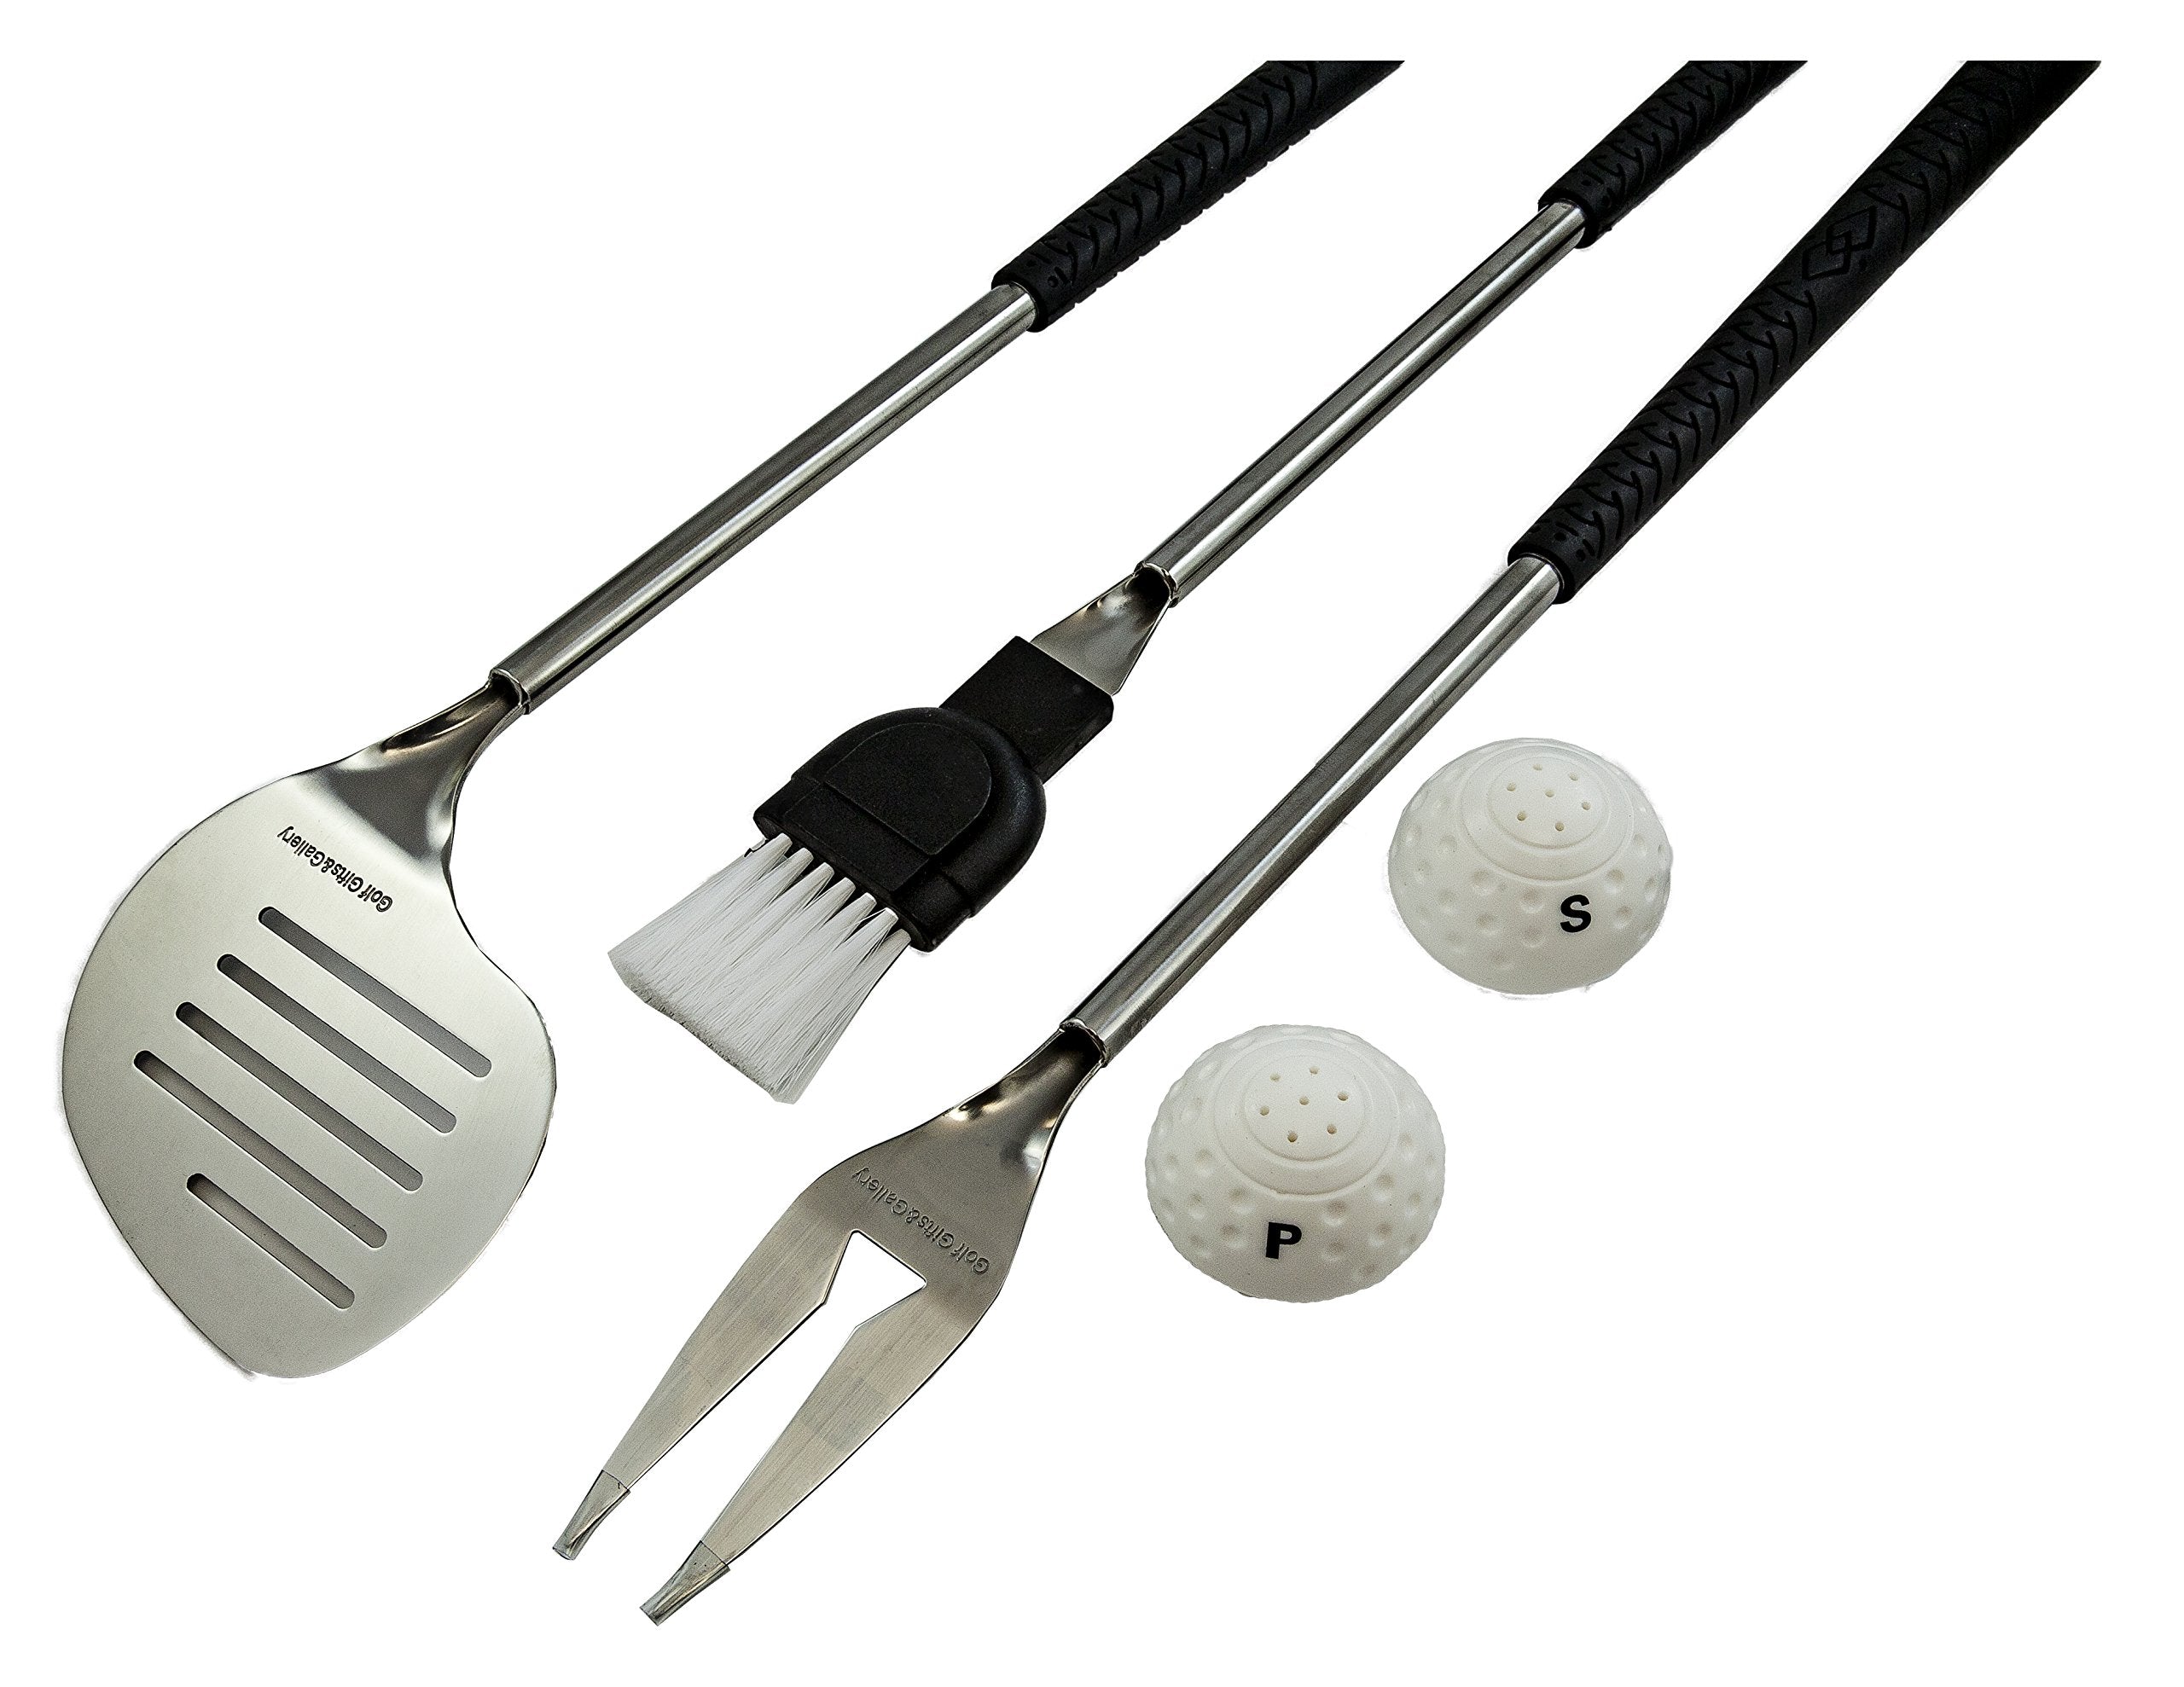 Golf Grilling Gifts - BBQ Set with Golf Club Handles - Golf Gift BBQ Set